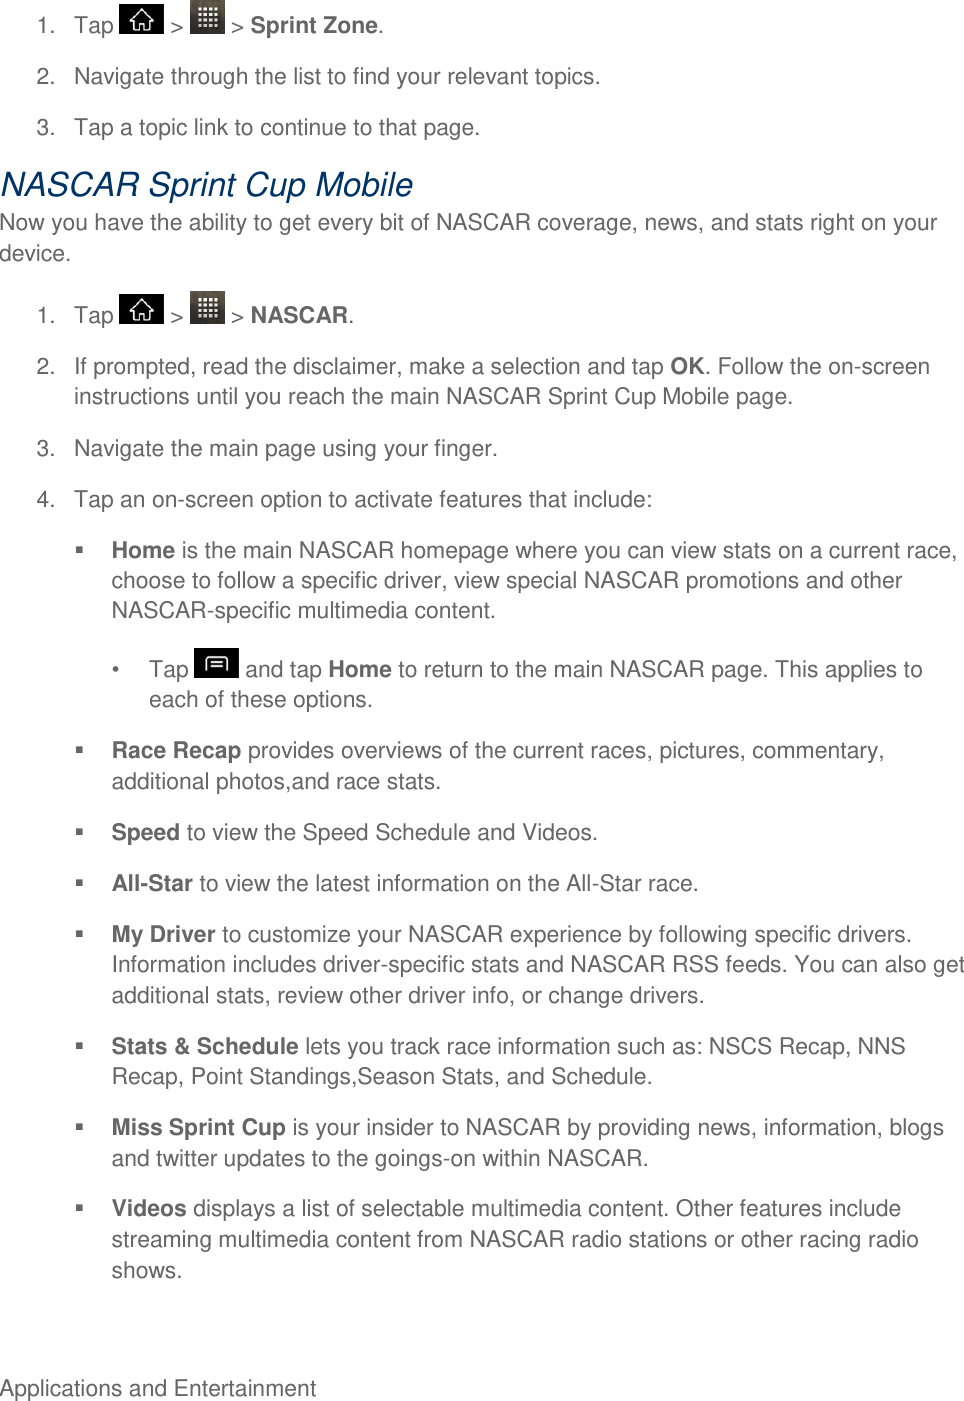 Applications and Entertainment     1.  Tap   &gt;   &gt; Sprint Zone. 2.  Navigate through the list to find your relevant topics. 3.  Tap a topic link to continue to that page. NASCAR Sprint Cup Mobile Now you have the ability to get every bit of NASCAR coverage, news, and stats right on your device. 1.  Tap   &gt;   &gt; NASCAR. 2.  If prompted, read the disclaimer, make a selection and tap OK. Follow the on-screen instructions until you reach the main NASCAR Sprint Cup Mobile page. 3.  Navigate the main page using your finger. 4.  Tap an on-screen option to activate features that include:  Home is the main NASCAR homepage where you can view stats on a current race, choose to follow a specific driver, view special NASCAR promotions and other NASCAR-specific multimedia content.   Tap   and tap Home to return to the main NASCAR page. This applies to each of these options.  Race Recap provides overviews of the current races, pictures, commentary, additional photos,and race stats.  Speed to view the Speed Schedule and Videos.  All-Star to view the latest information on the All-Star race.  My Driver to customize your NASCAR experience by following specific drivers. Information includes driver-specific stats and NASCAR RSS feeds. You can also get additional stats, review other driver info, or change drivers.  Stats &amp; Schedule lets you track race information such as: NSCS Recap, NNS Recap, Point Standings,Season Stats, and Schedule.  Miss Sprint Cup is your insider to NASCAR by providing news, information, blogs and twitter updates to the goings-on within NASCAR.  Videos displays a list of selectable multimedia content. Other features include streaming multimedia content from NASCAR radio stations or other racing radio shows. 